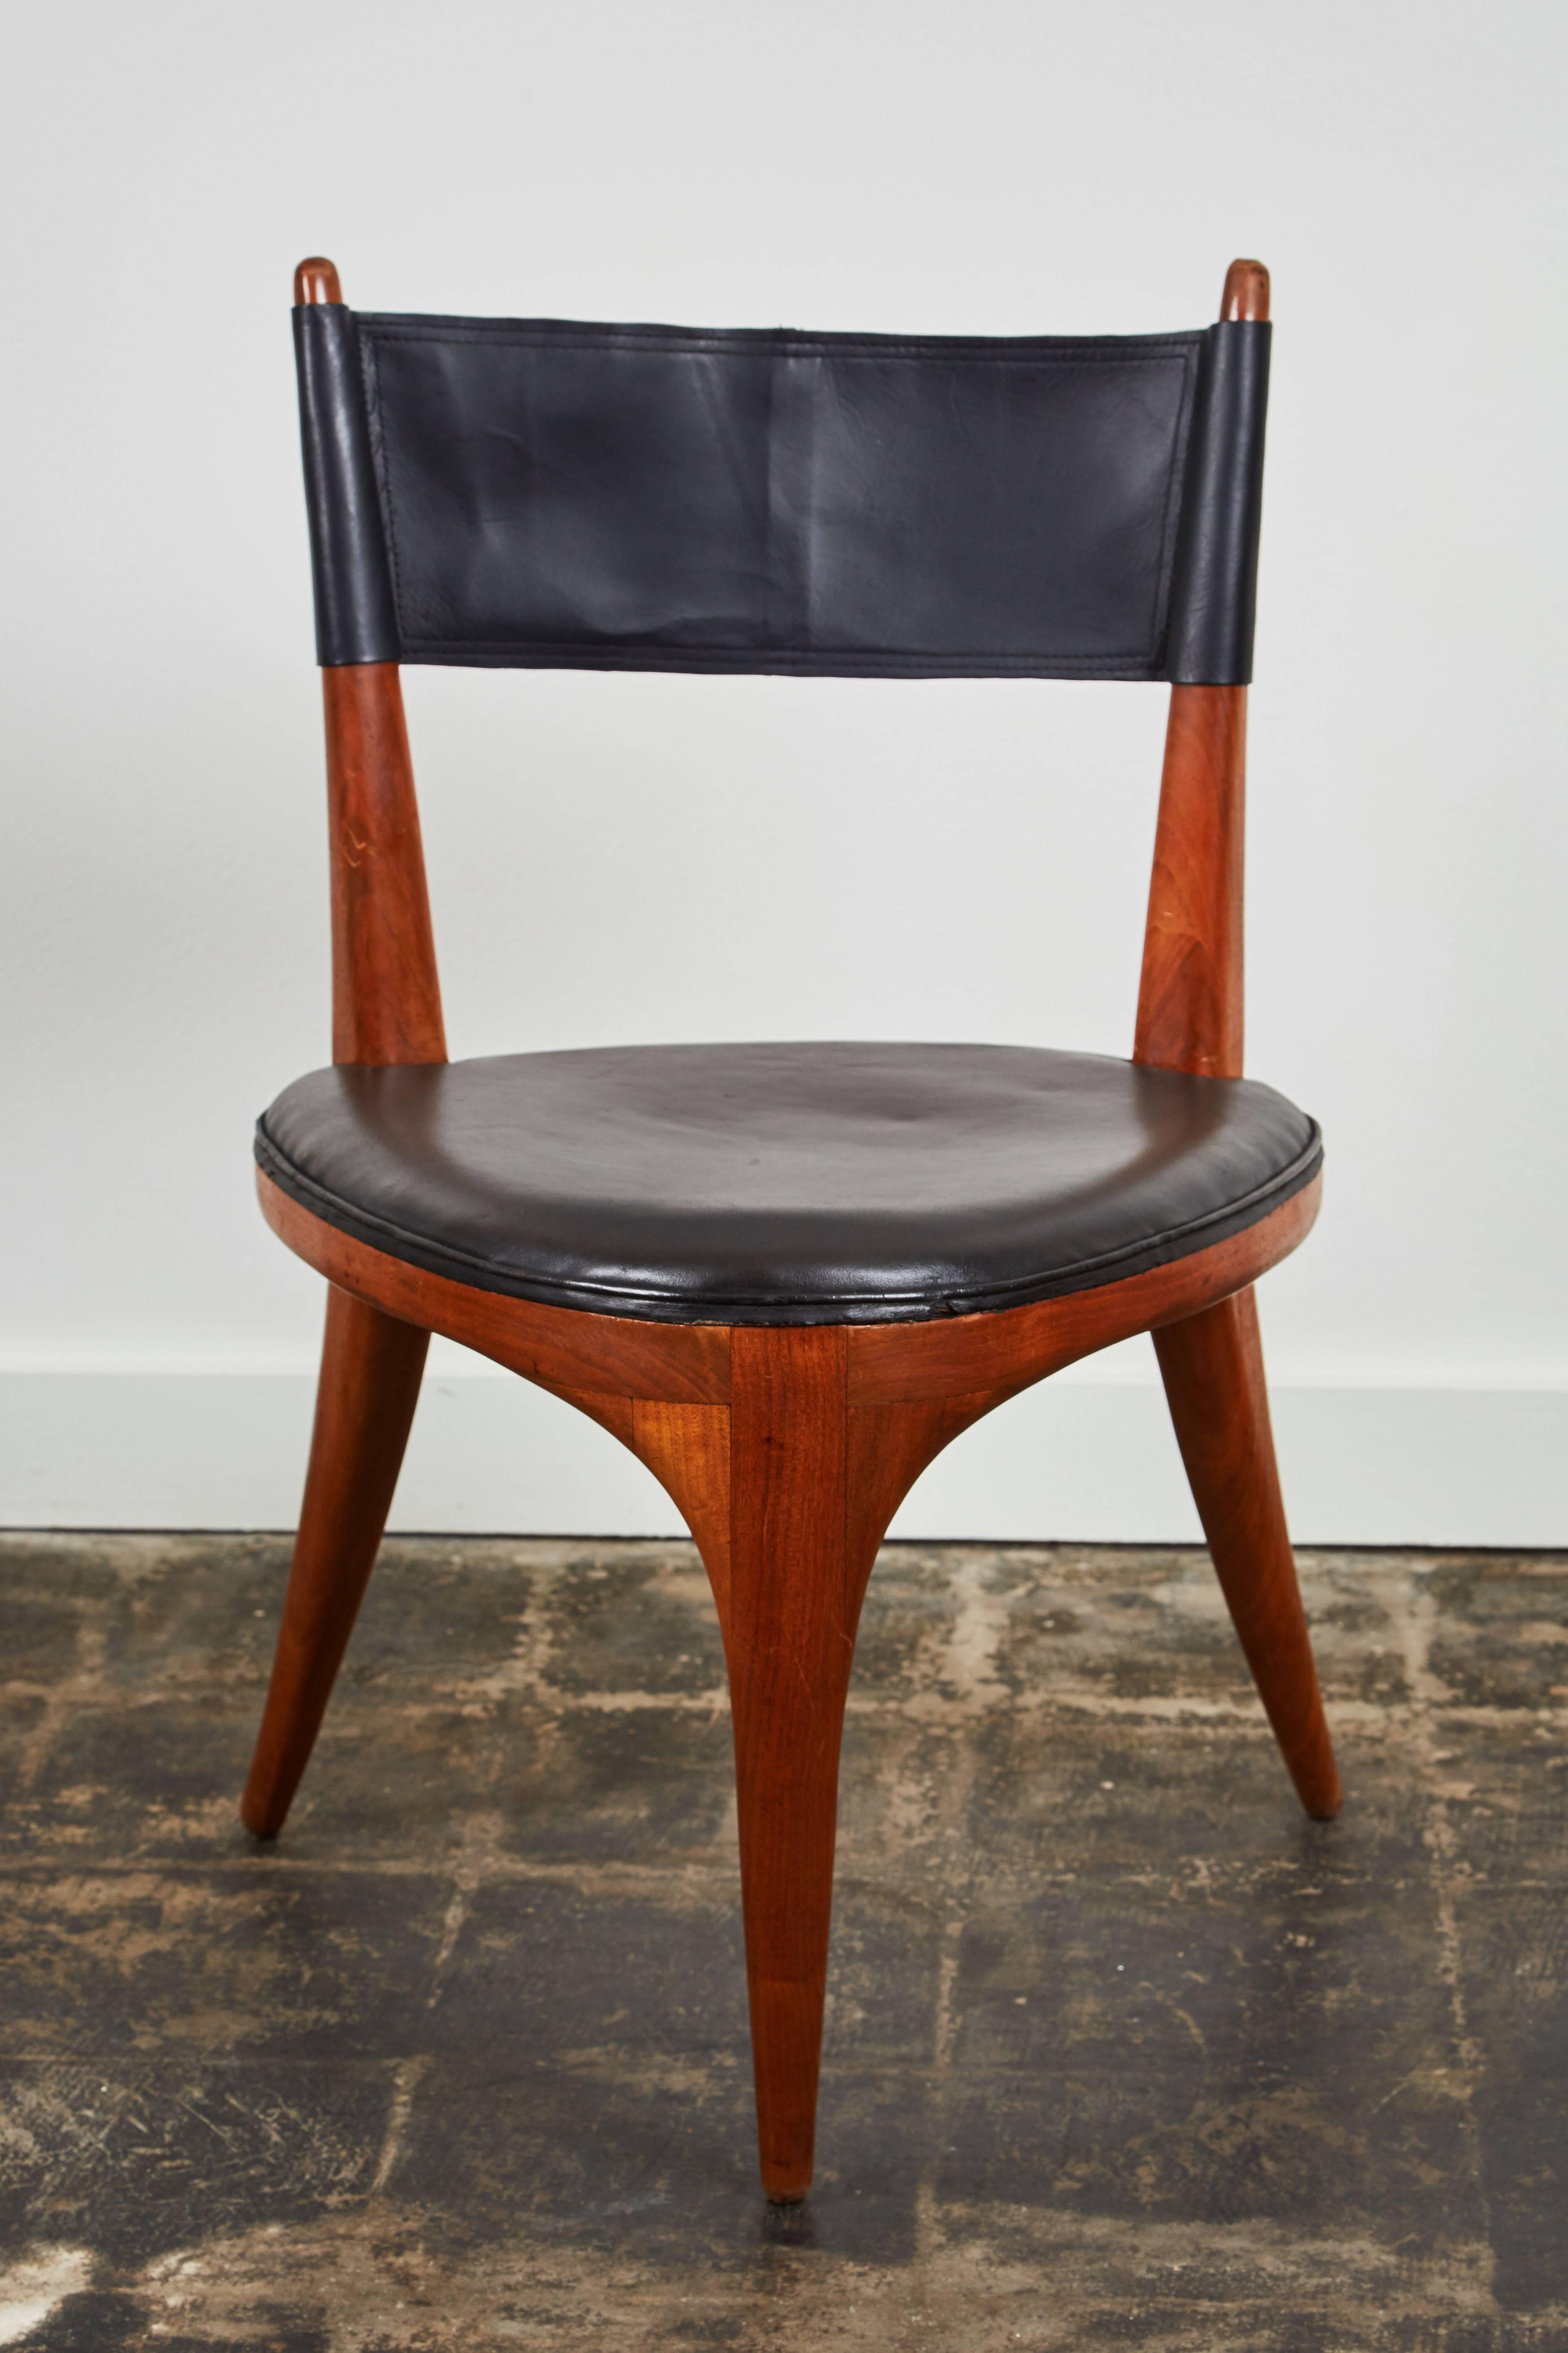 Hand-Carved Handcrafted Tripod Chair by Allen Ditson